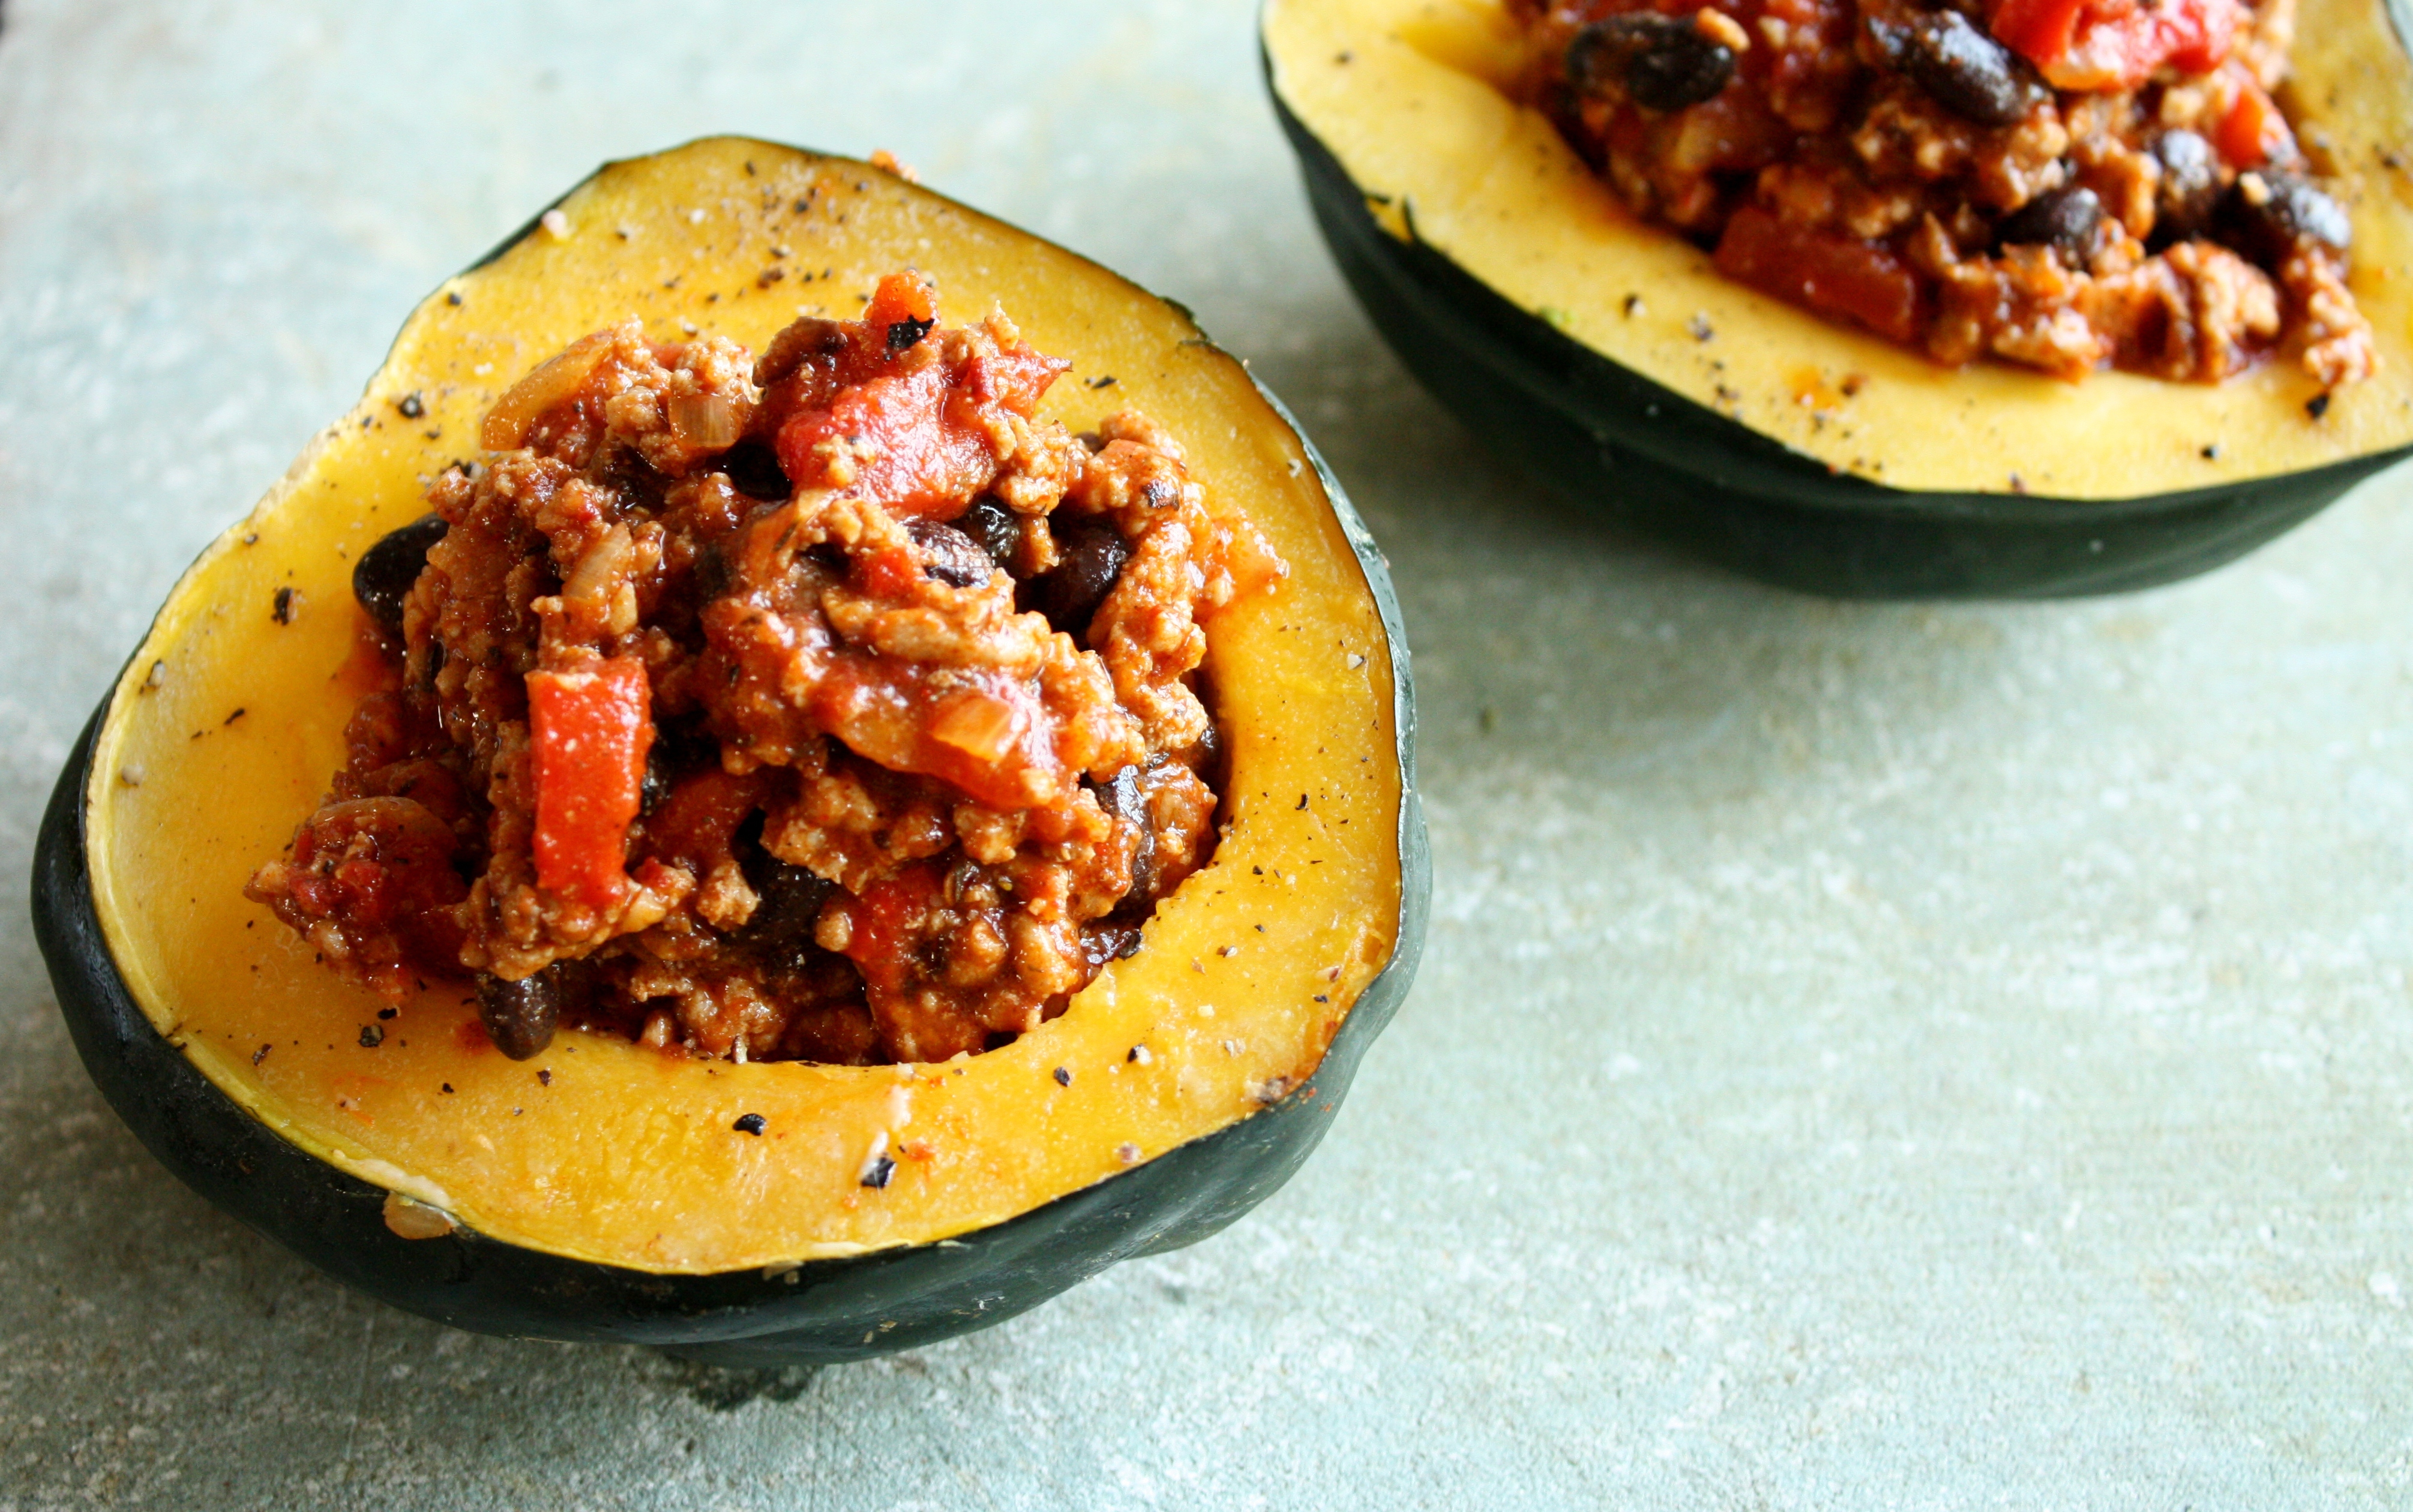 A yellow acorn squash cut in half and filled with meat and pasta sauce.